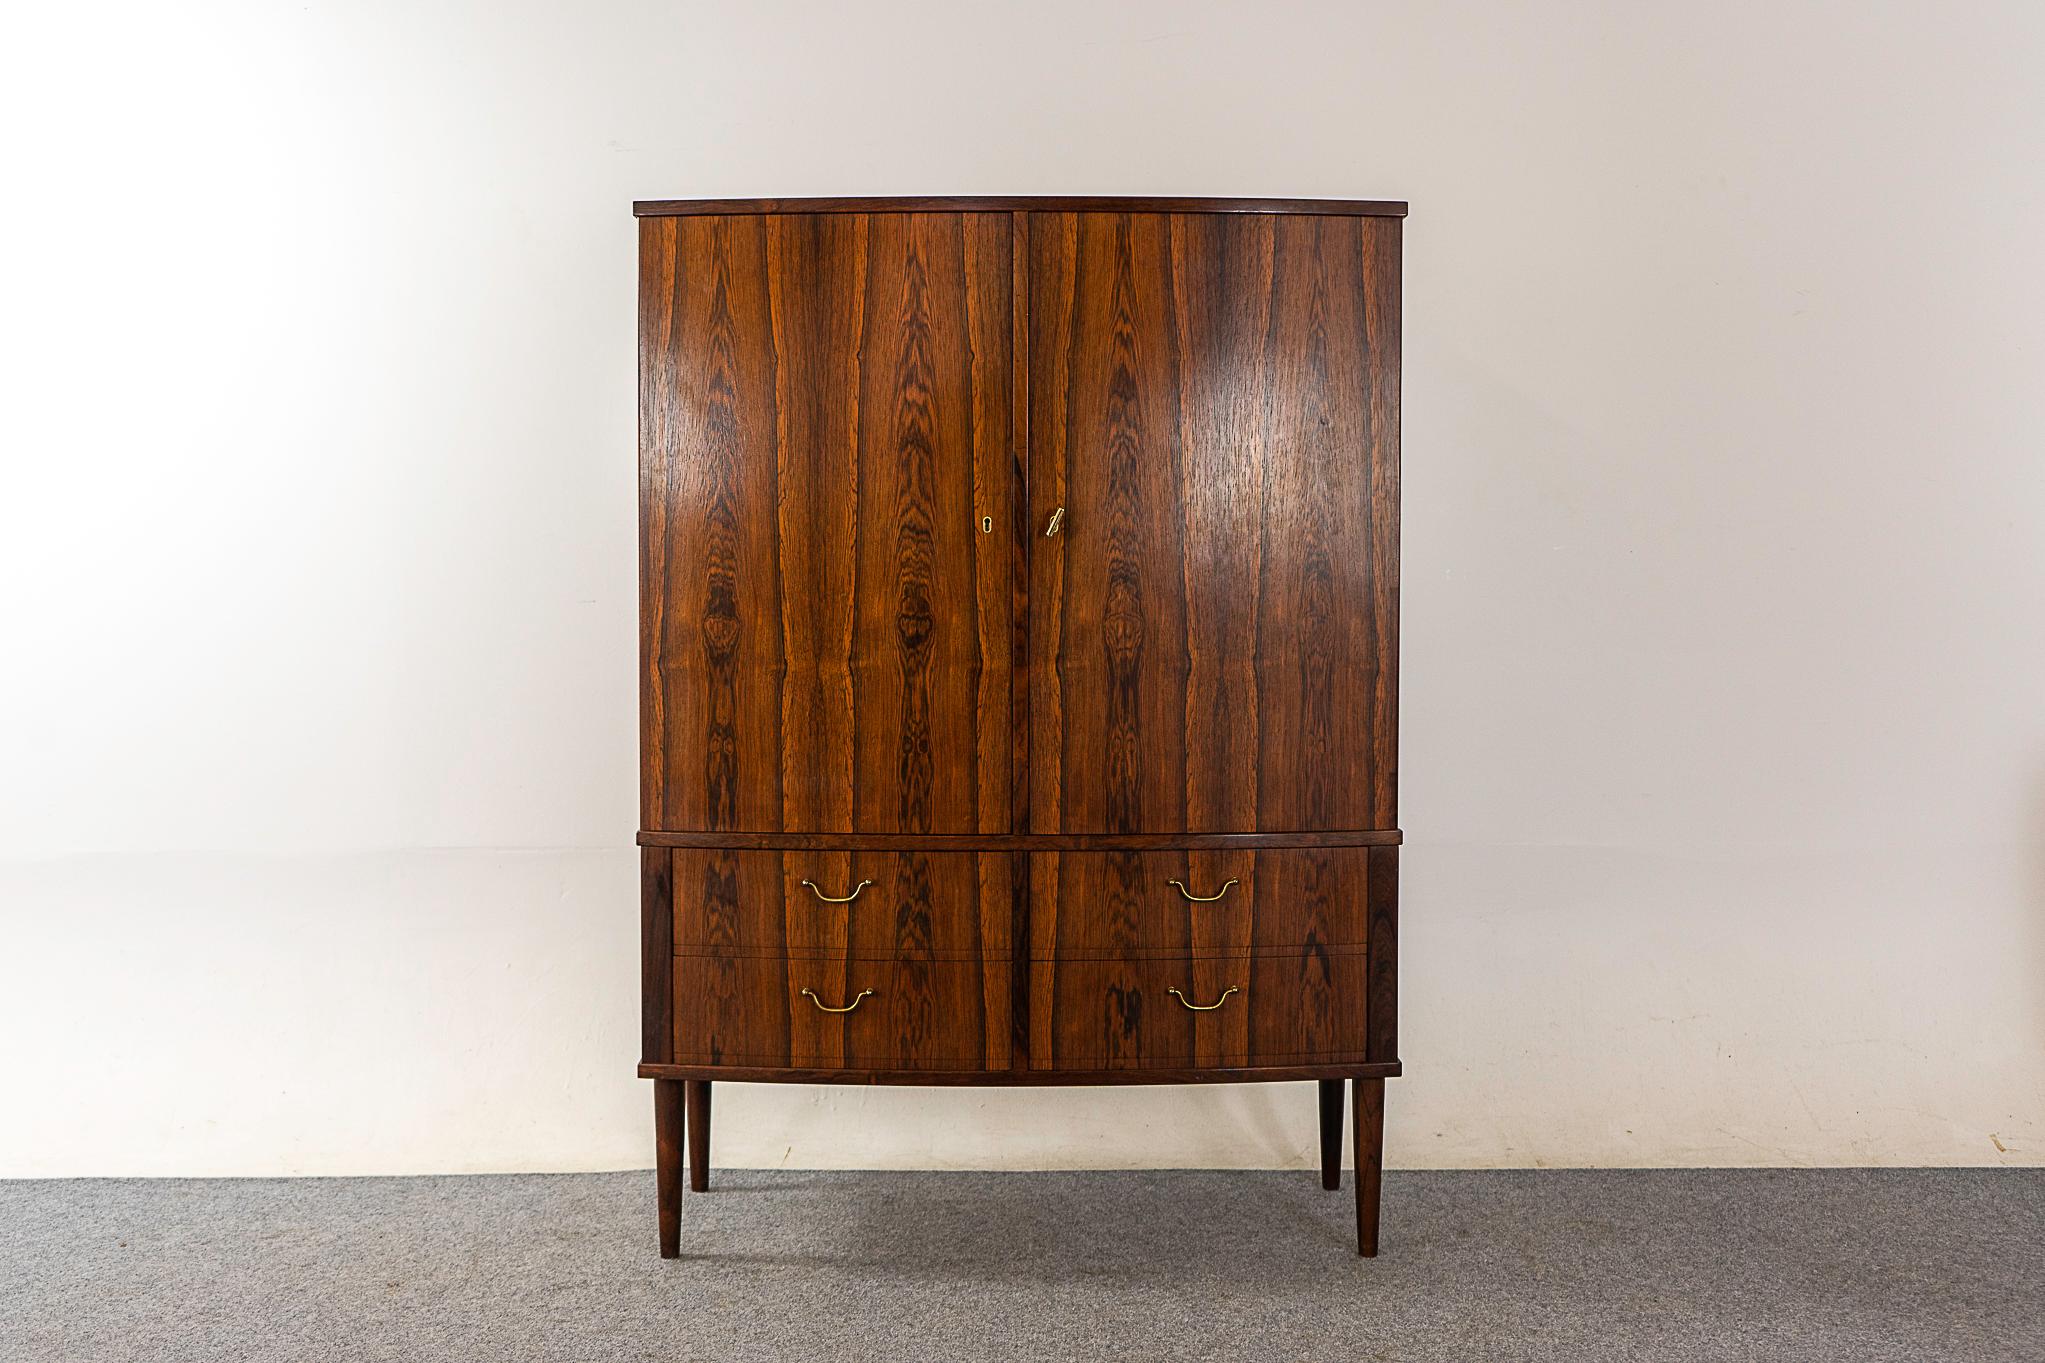 Rosewood midcentury cabinet, circa 1960s. Exceptional book-matched veneer from top to bottom! Locking compartments with 2 adjustable shelves and 4 sleek flatware drawers. Lower drawers with elegant metal handles and dovetailed construction. Quality